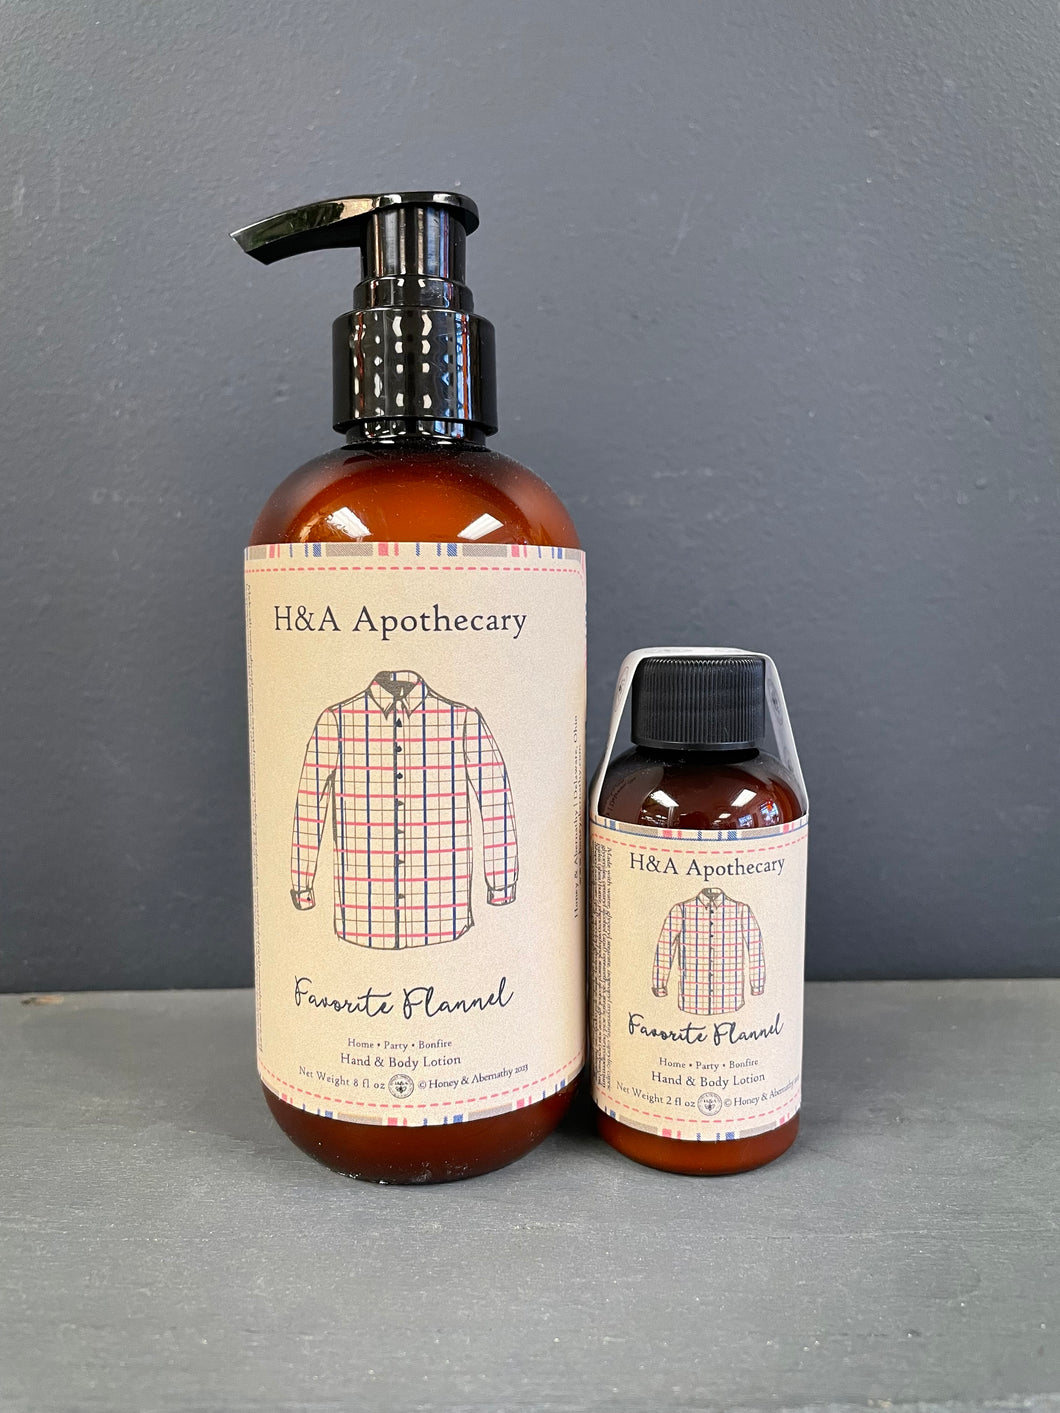 H&A Apothecary Favorite Flannel Hand & Body Lotion